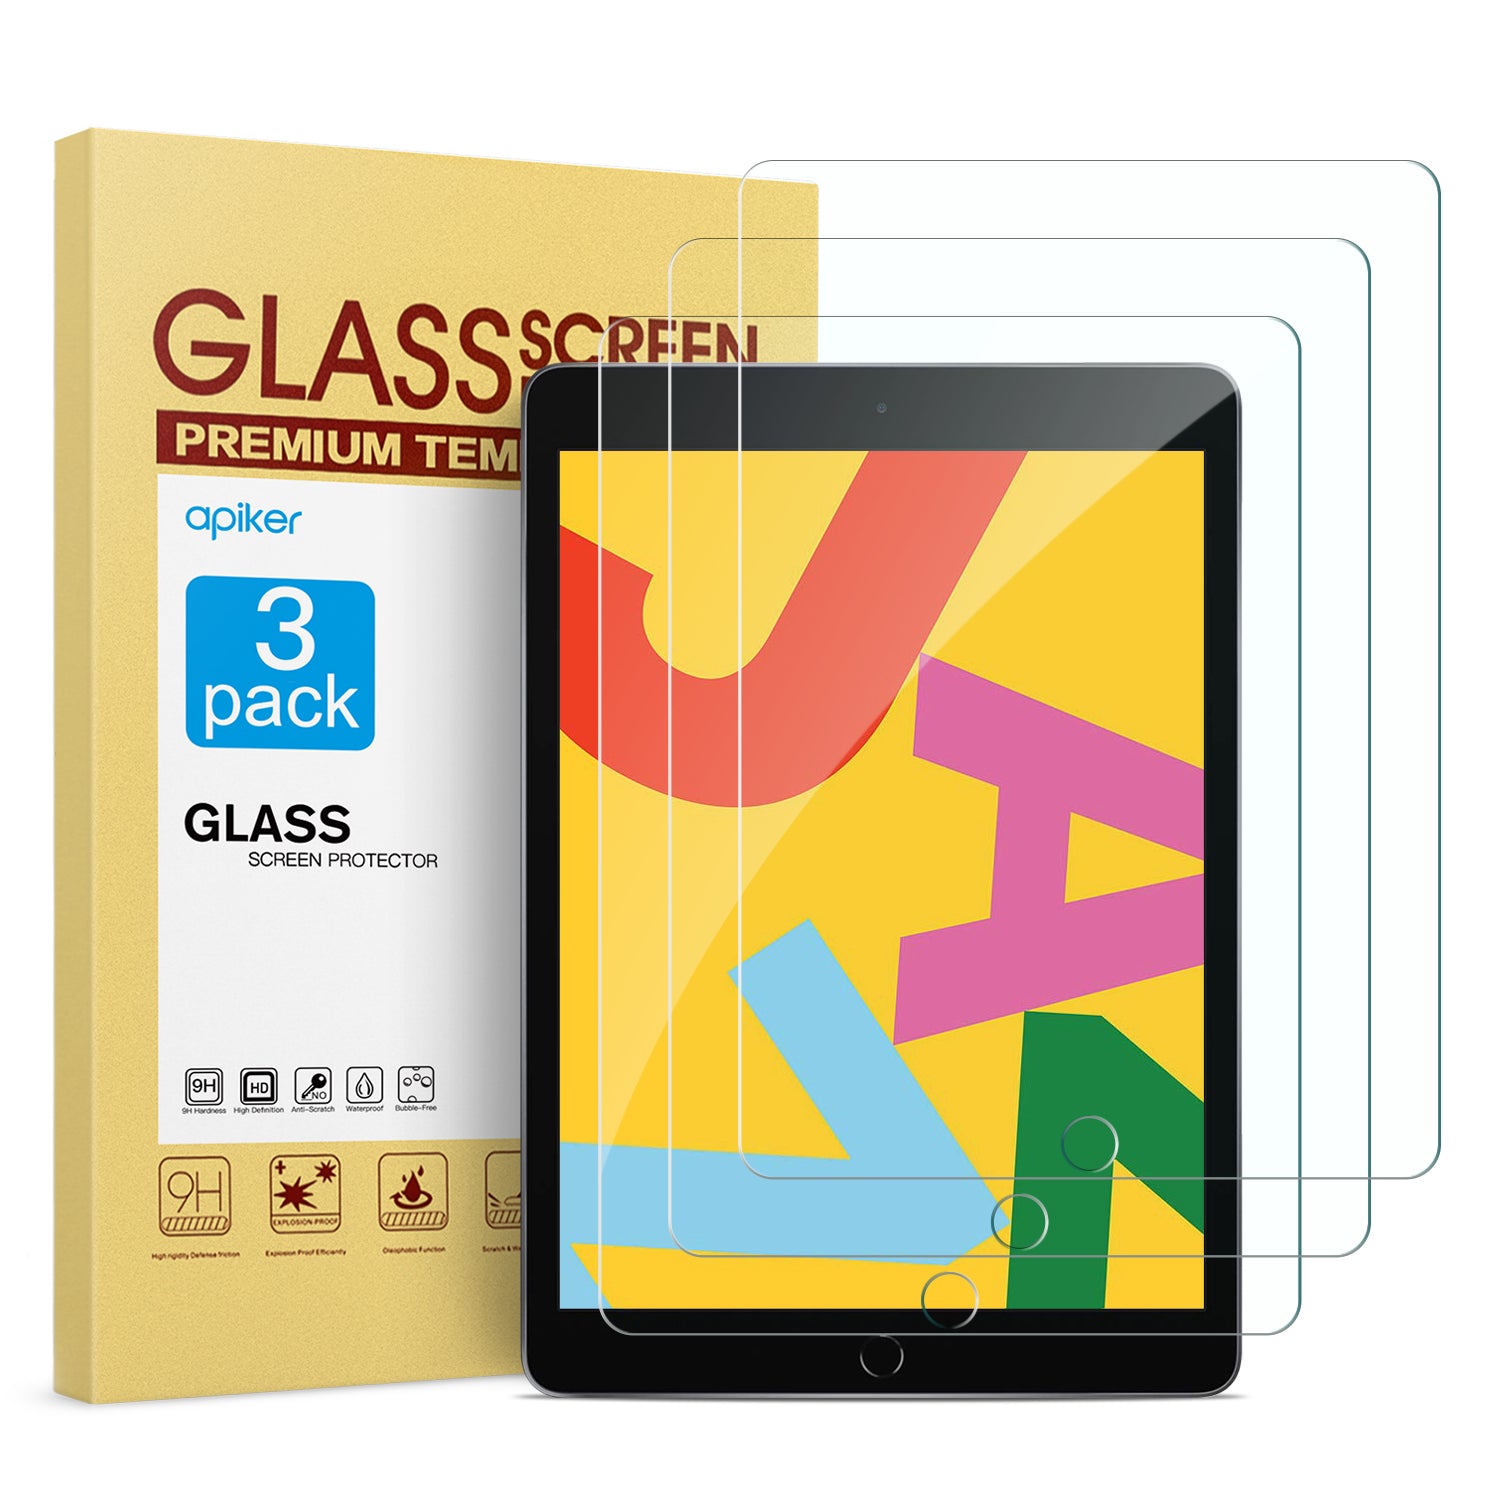 [3 Pack] Screen Protector for iPad 10.2 Inch 2019 Release, apiker Tempered Glass Screen Protector Compatible with Apple Pencil